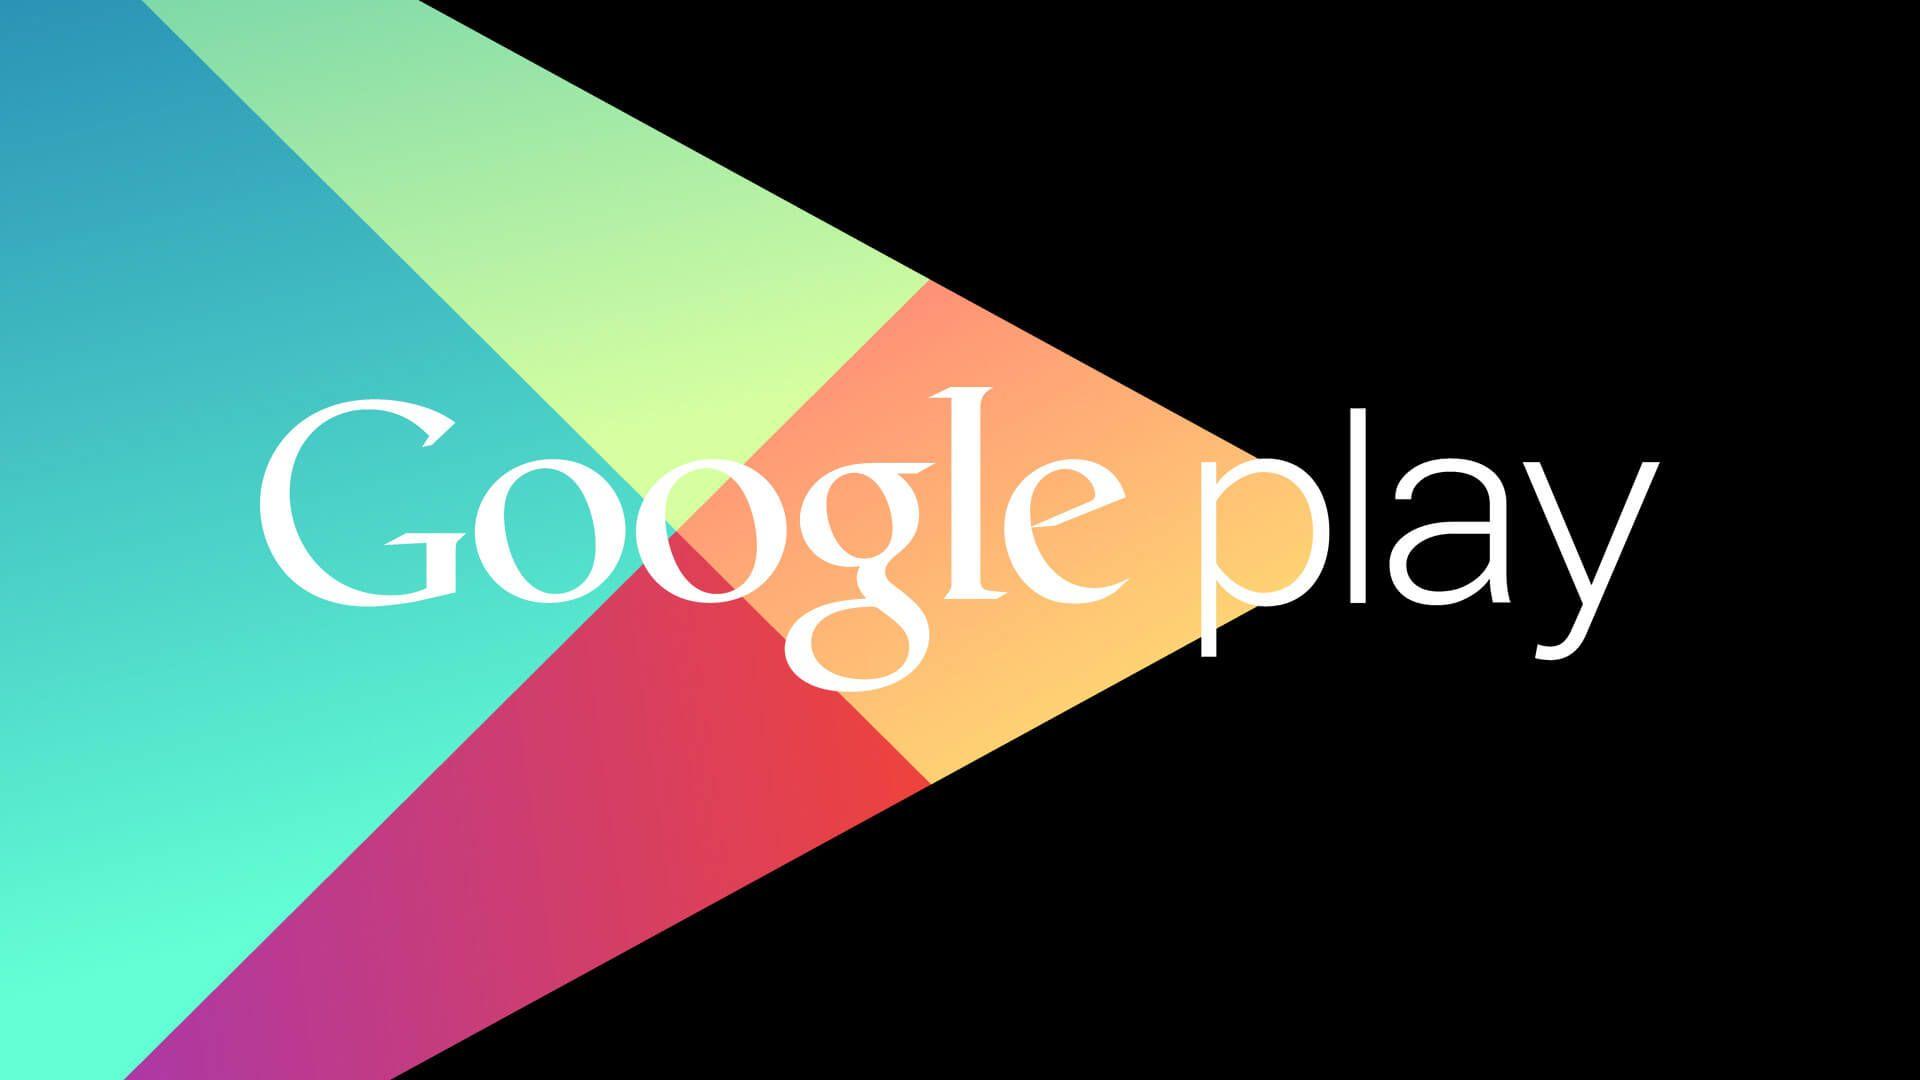 Google Play App On Android Logo - Search Ads In Google Play Store Rolling Out For All Android App ...